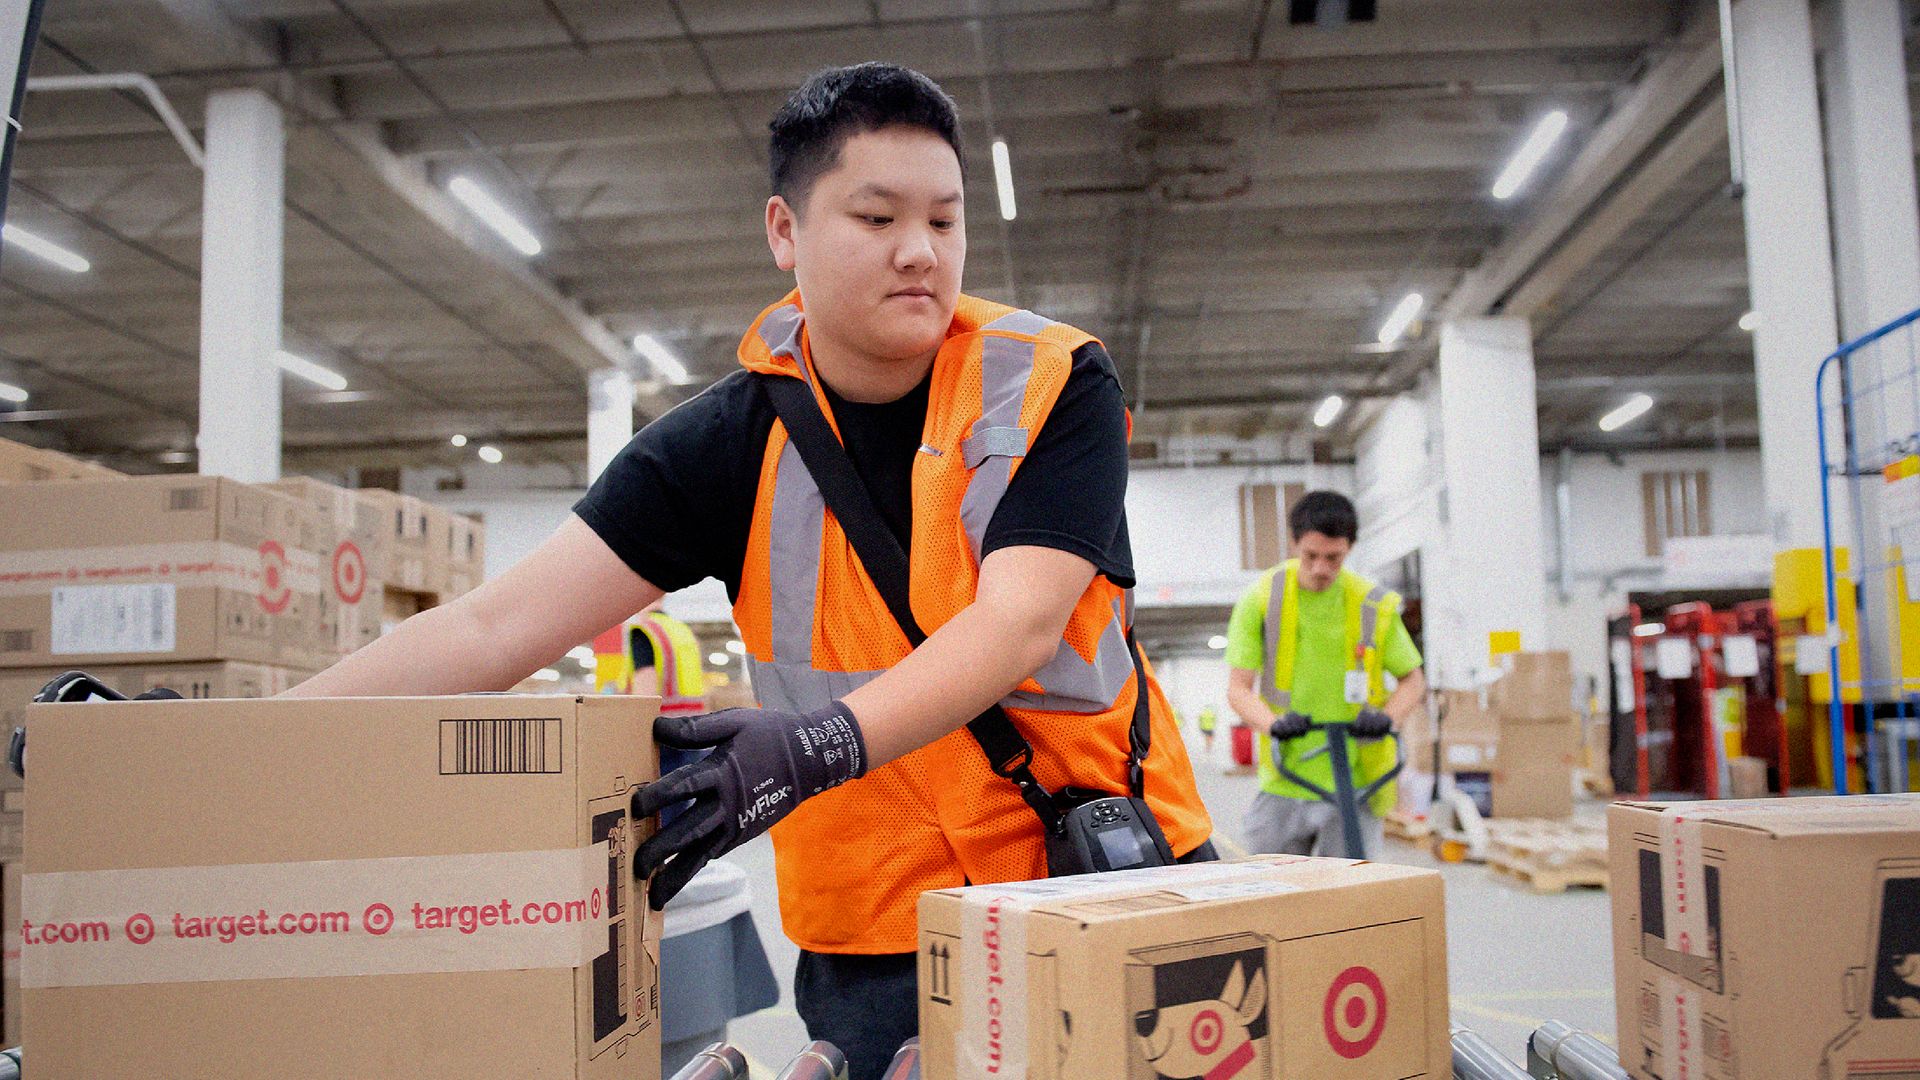 Target employee works in sortation facility moving boxes